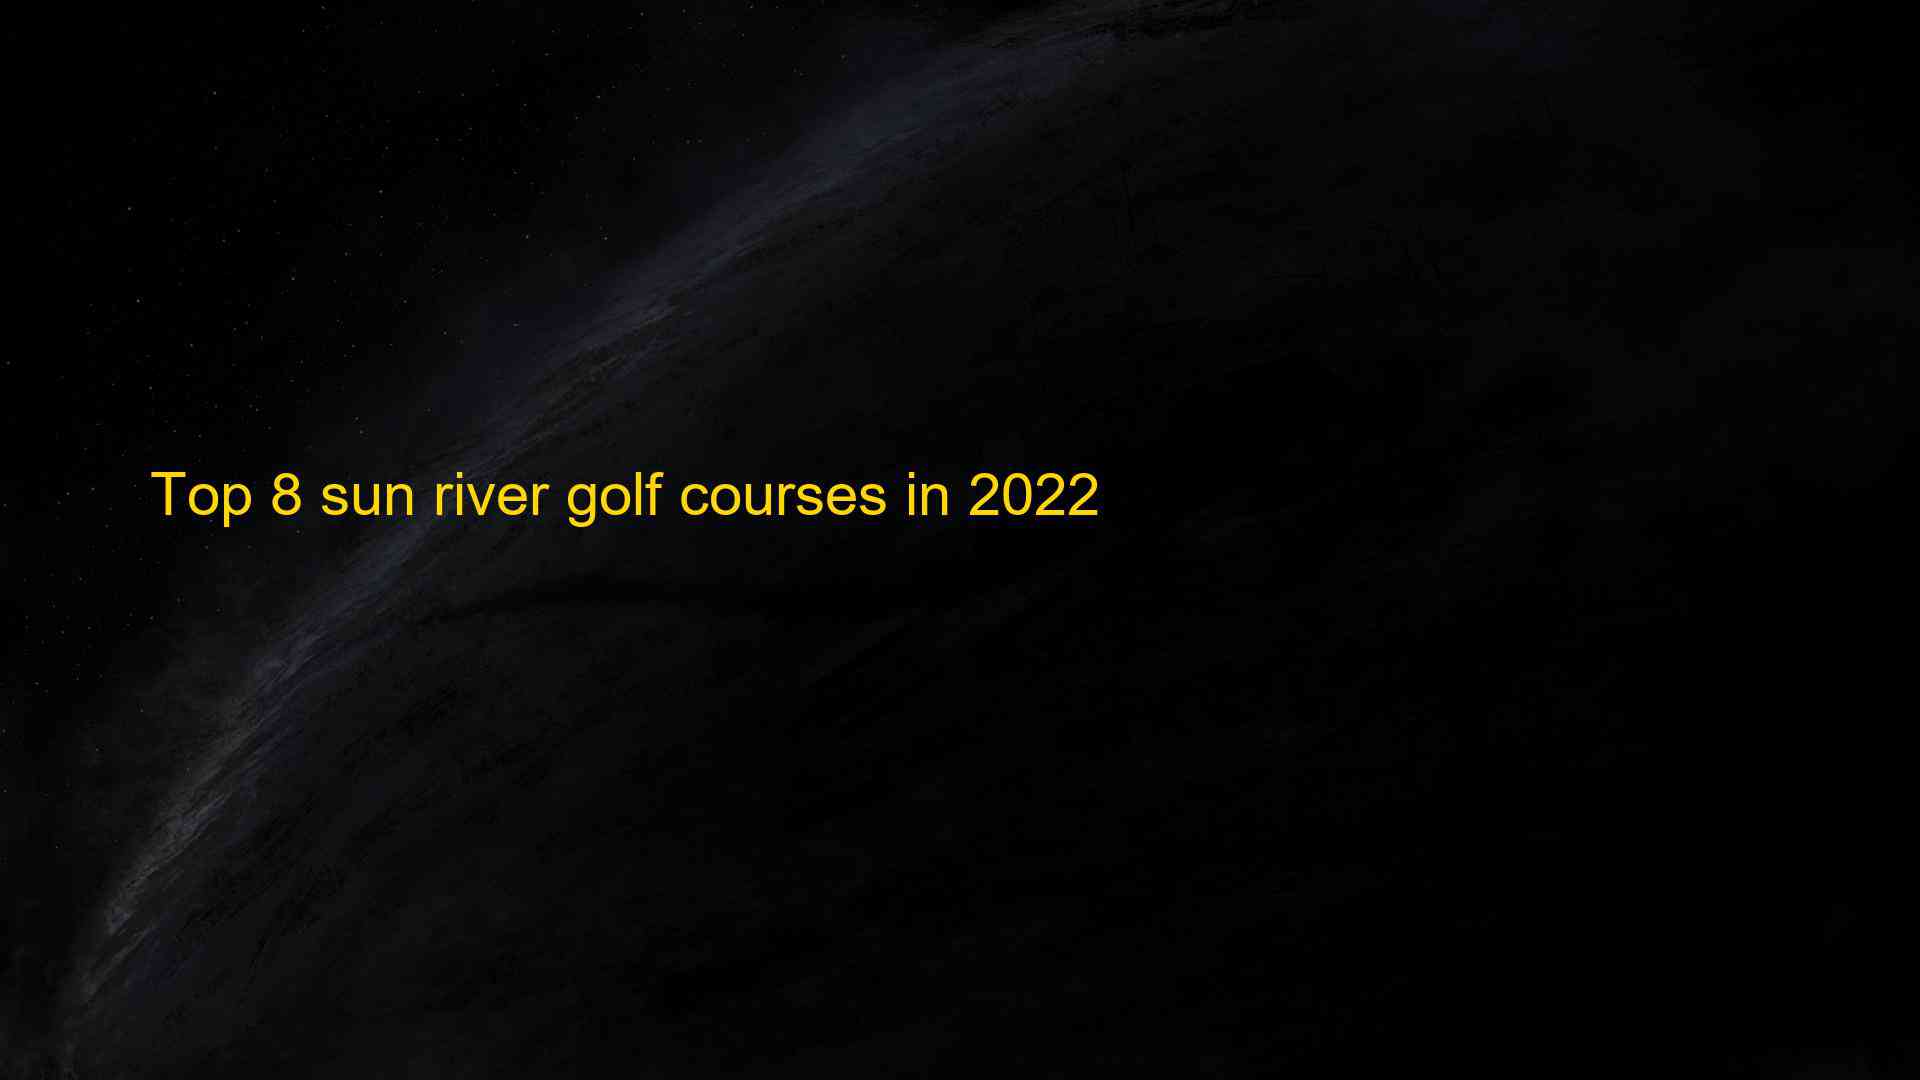 Top 8 sun river golf courses in 2022 1660929422